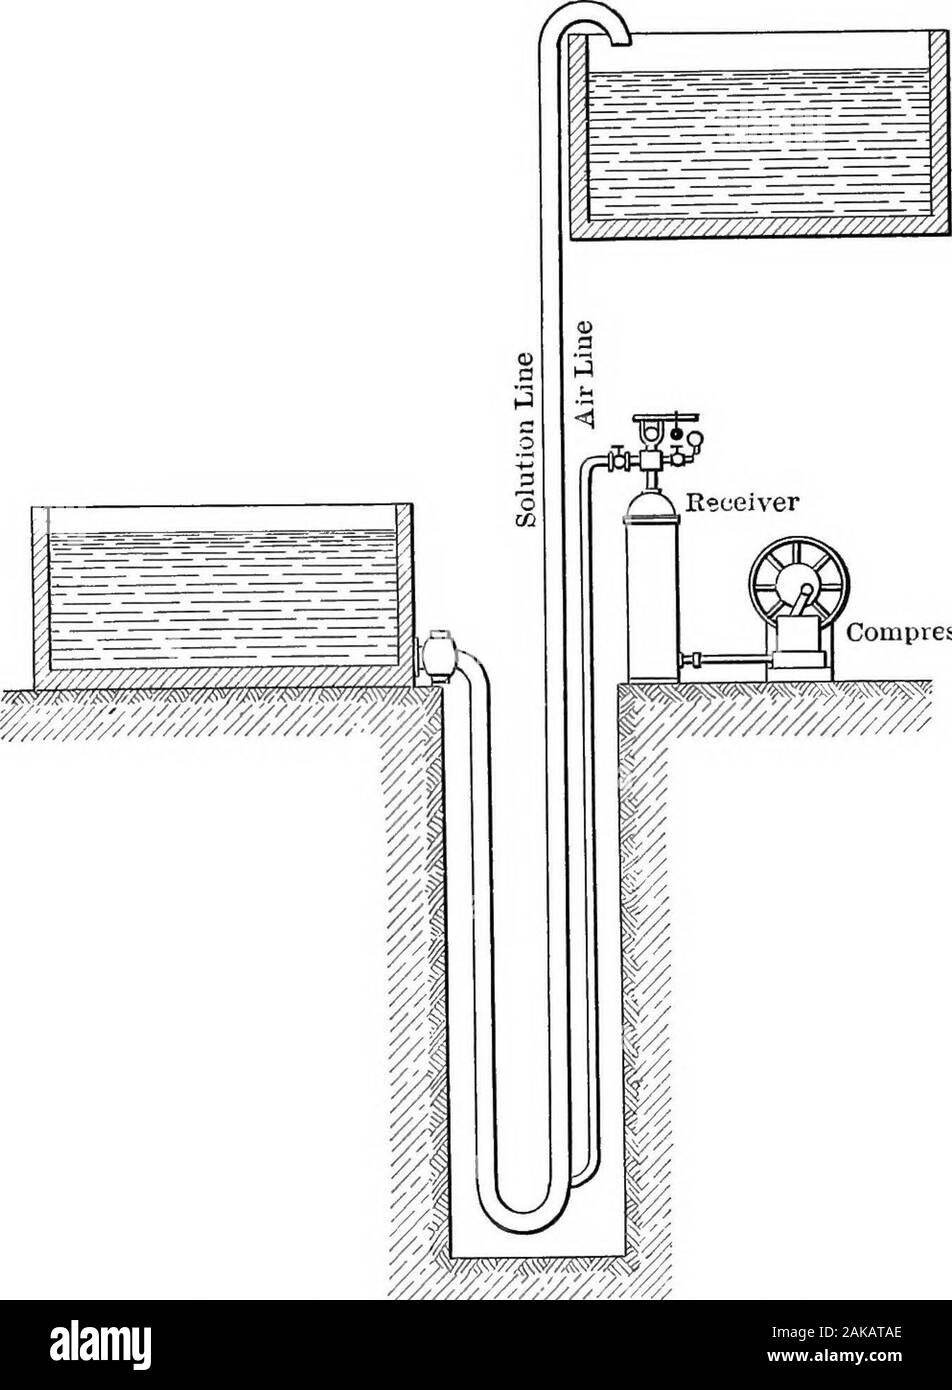 The hydrometallurgy of copper . M Steel Cast RingCounter-sunkEivets FiQ. 106.—Detail of Montejus lead hned tank construction. Showing solution pipe connection at bottom. 464 HY.DROMETALLURGY OF COPPER at 8. The object of bolting the pipe to the shell at 8 is to prevent vibra-tion of the end and thus prevent its early destruction. Sometimes thelead pipes, instead of being bolted to the shell are burned to the leadlining, but this is an inferior way of doing it. The objection to this type of Montejus is that it is not automatic, asordinarily built. It takes about 5 minutes to fill a Montejus of Stock Photo